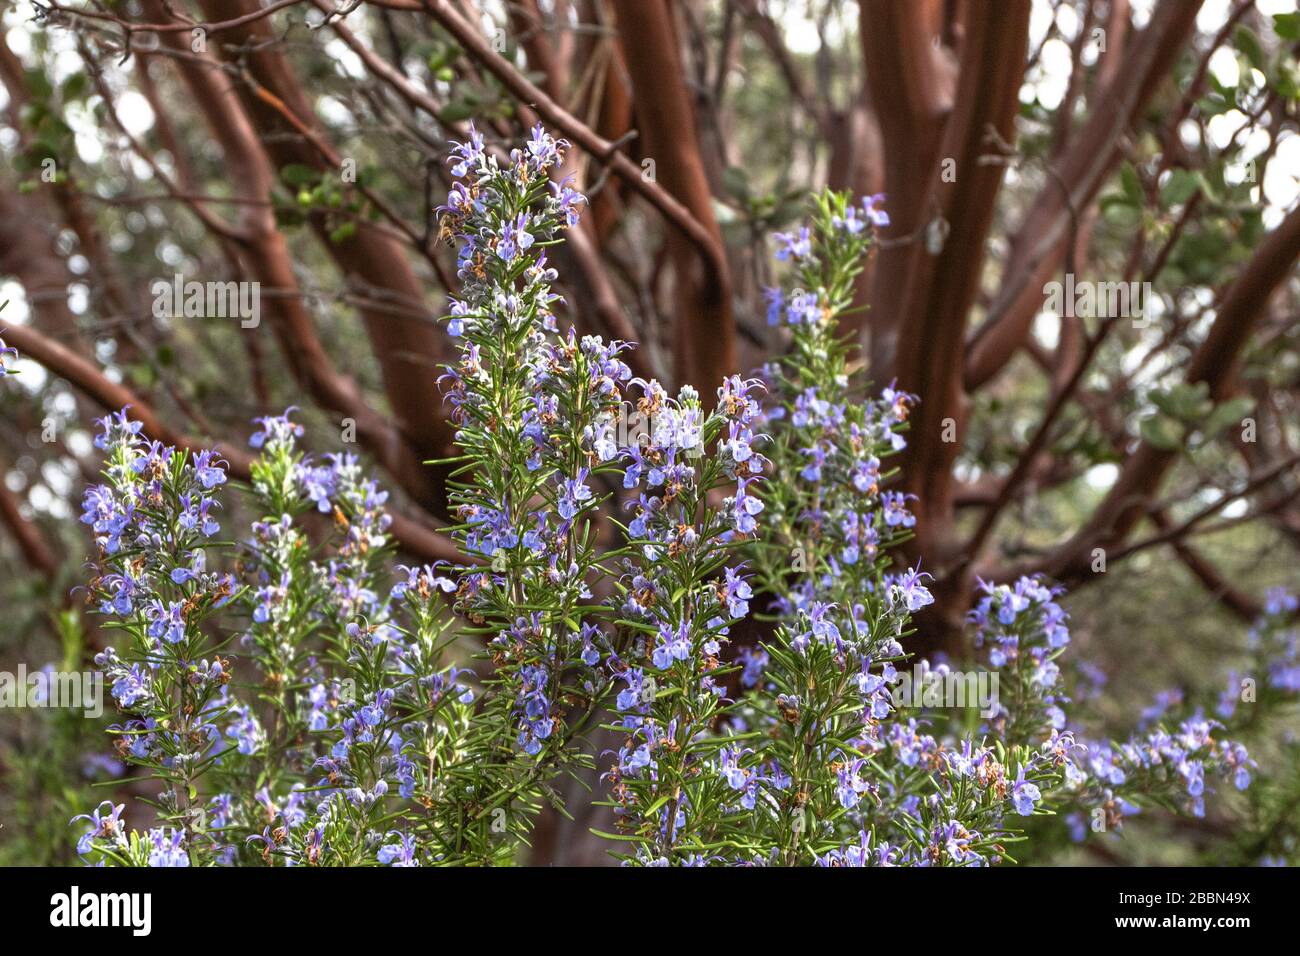 bright purple blue rosemary culinary and medicinal herb growing oustide, good springtime polinator for bees, manzinita tree in background Stock Photo